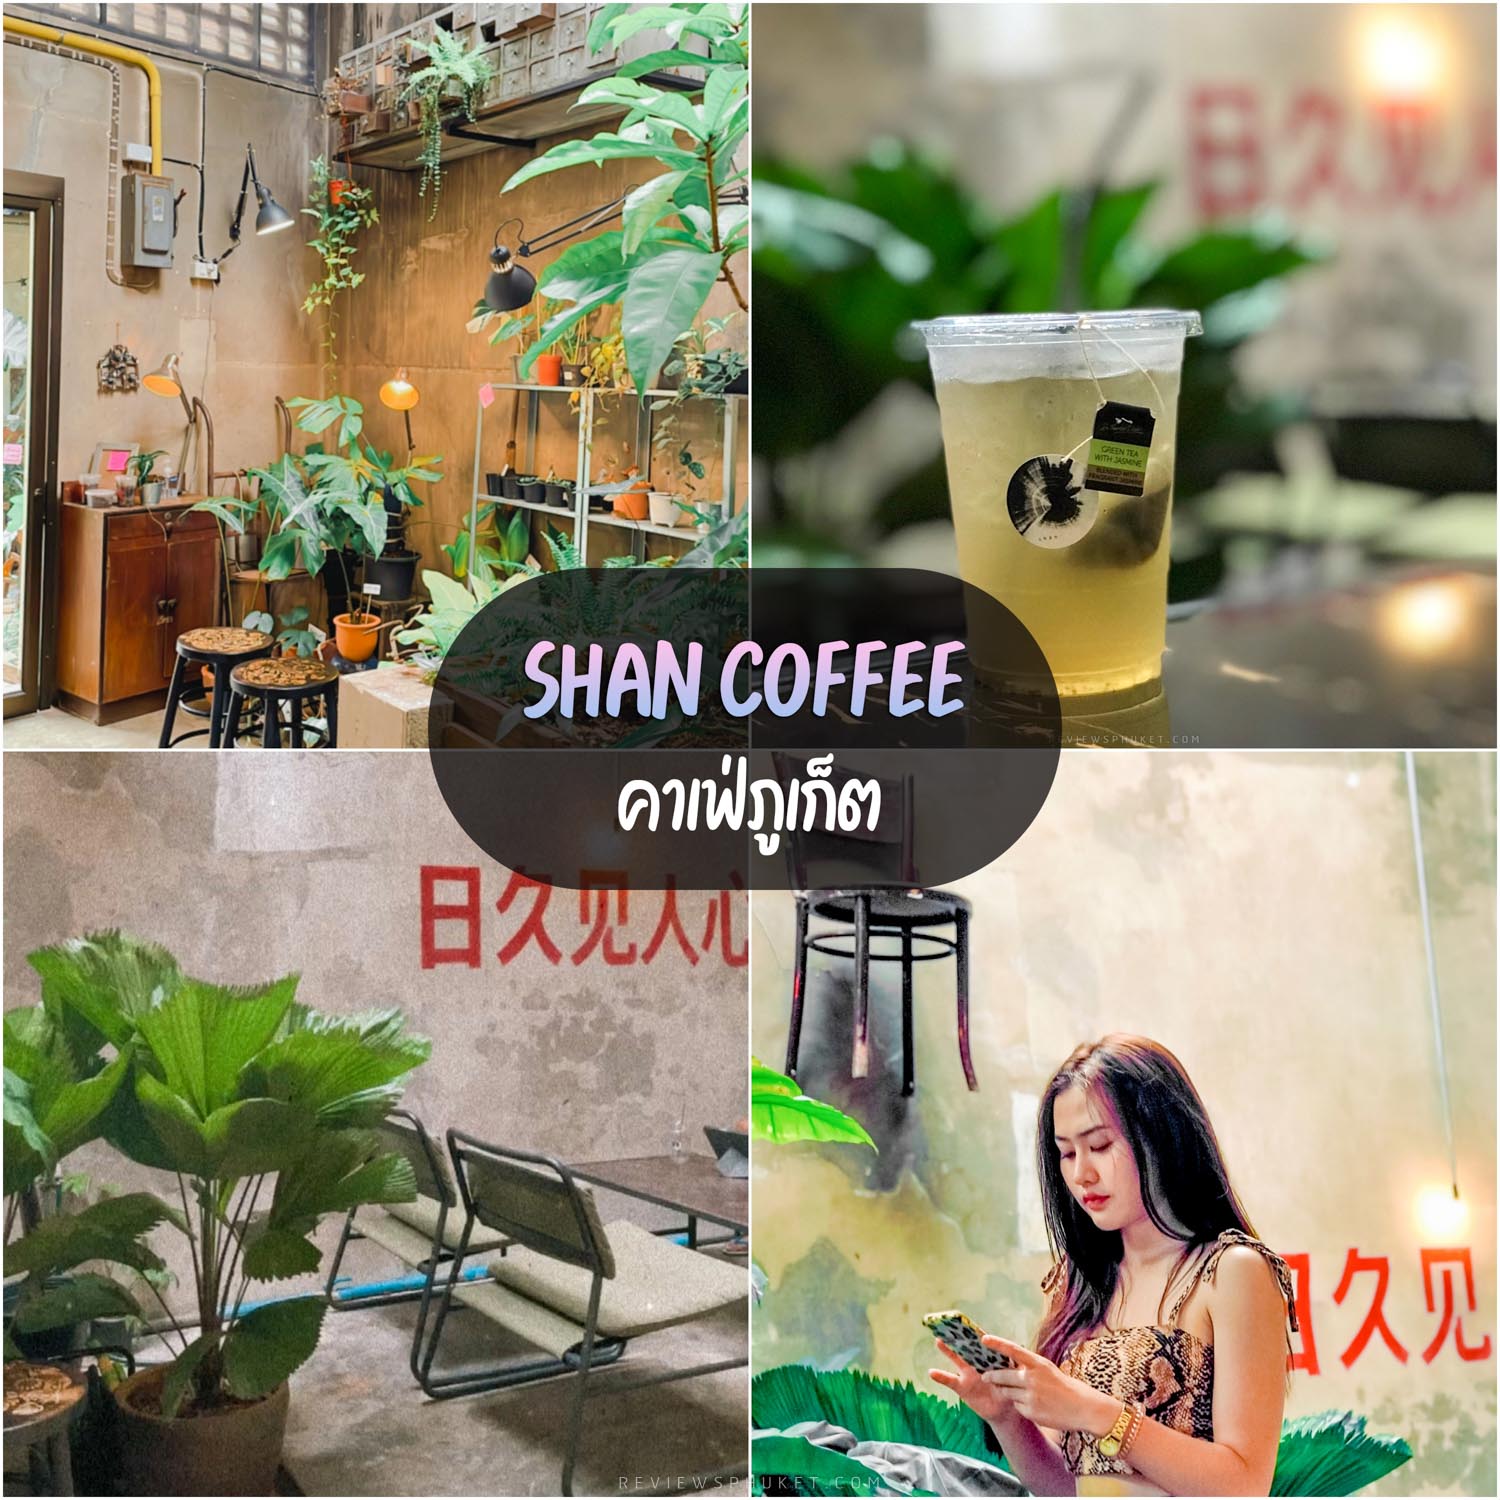 Shan coffee, Phuket cafe, secret coffee shop decorated in a unique style, good coffee.